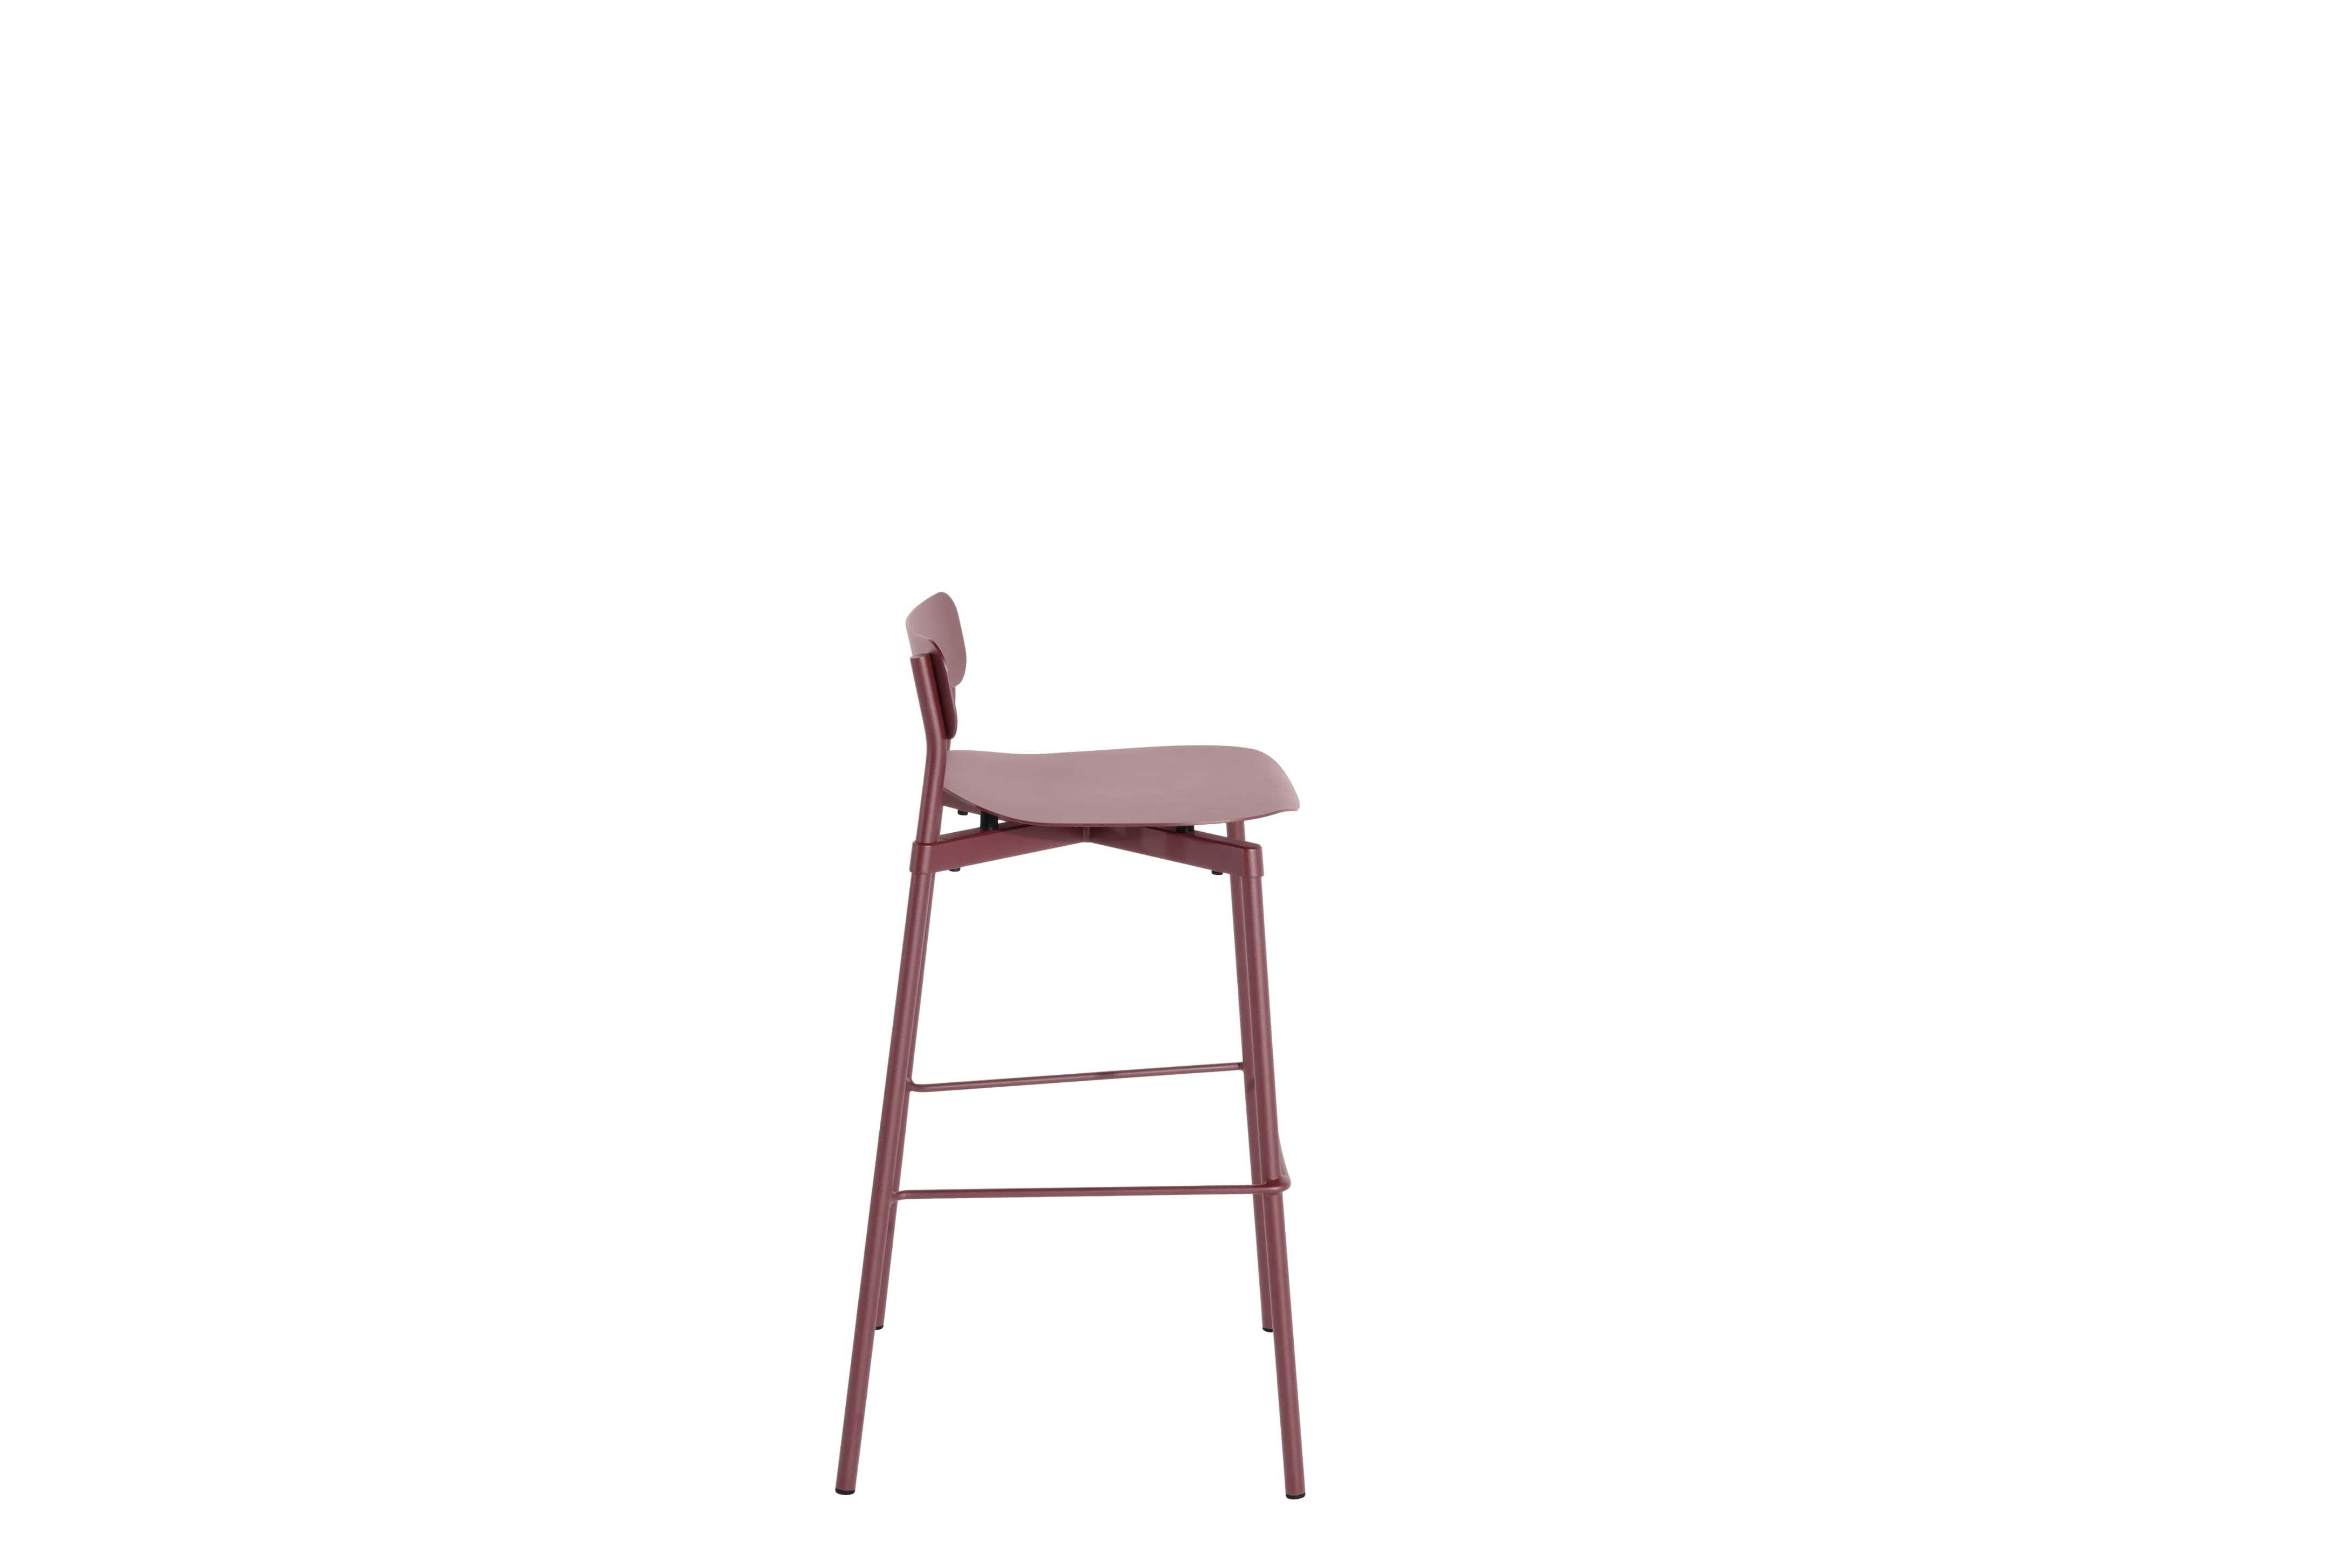 Petite Friture Large Fromme Bar stool in Brown-red Aluminium by Tom Chung, 2020

The Fromme collection stands out by its pure line and compact design. Absorbers placed under the seating gives a soft and very comfortable flexibility to seats. Made